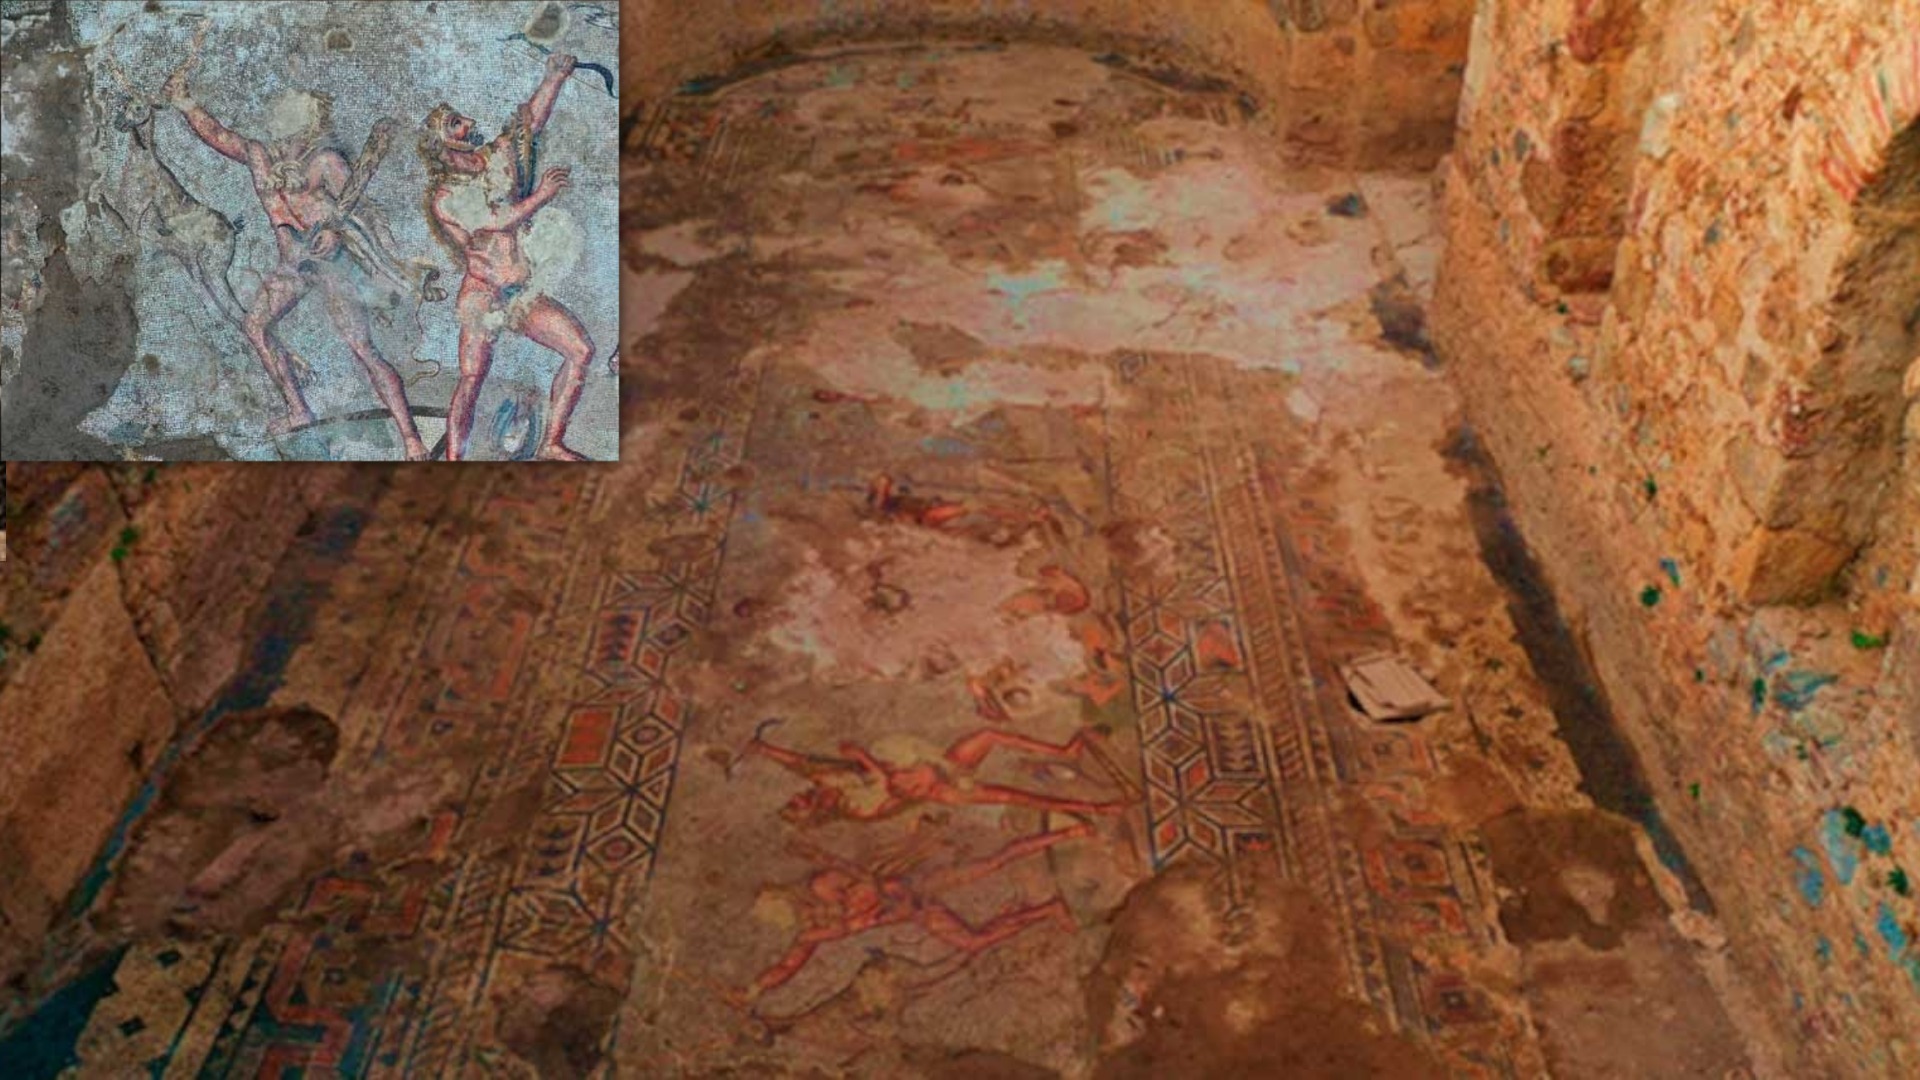 Massive Mosaic Depicting the 12 Labors of Heracles Unearthed in Turkey